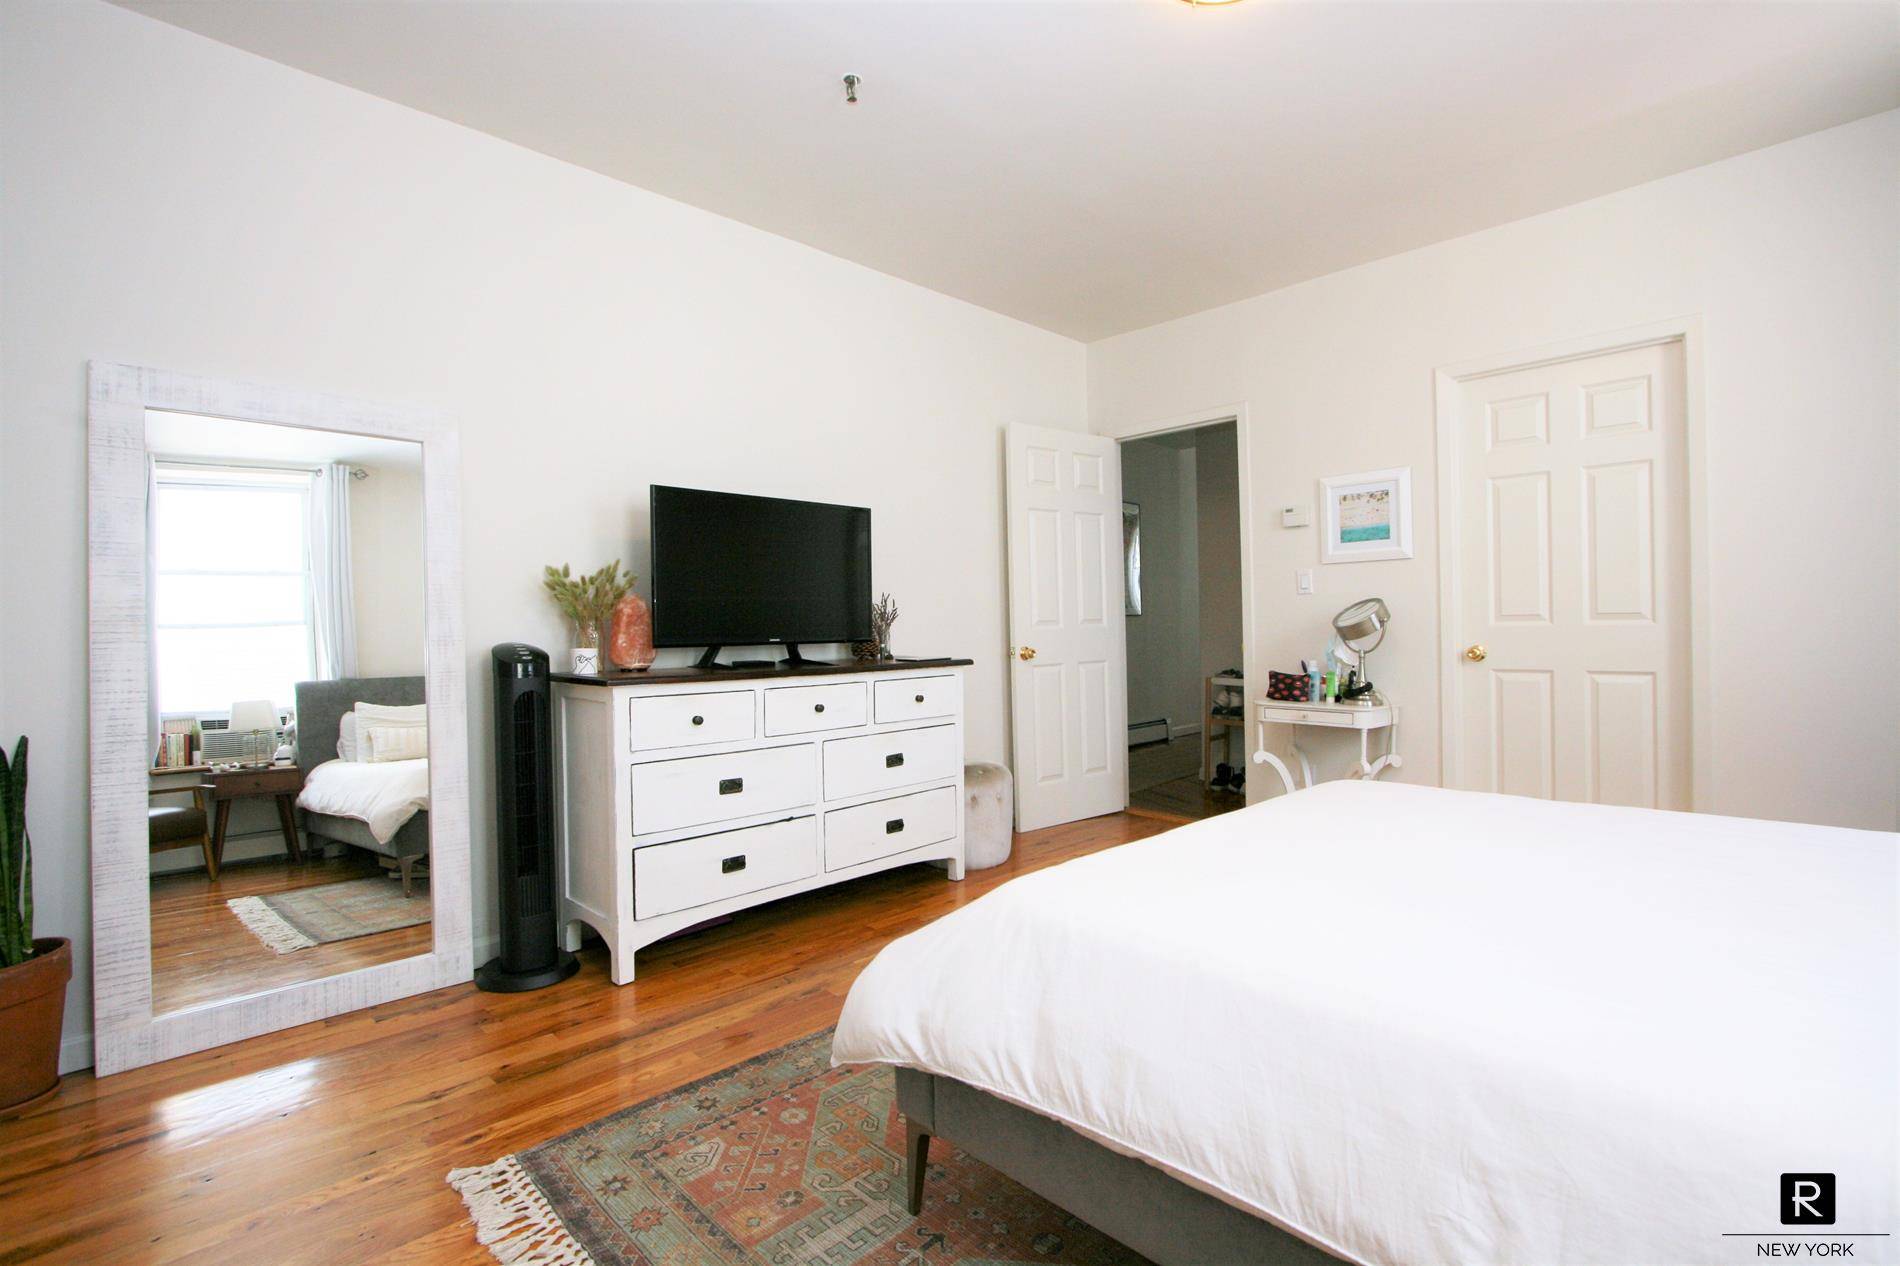 Spacious Brownstone Brooklyn Pet Friendly 1 Bedroom Loft Apartment Washer amp ; Dryer in the Heart of Park Slope North on Leafy Prospect Place conveniently situated between the B Q ...